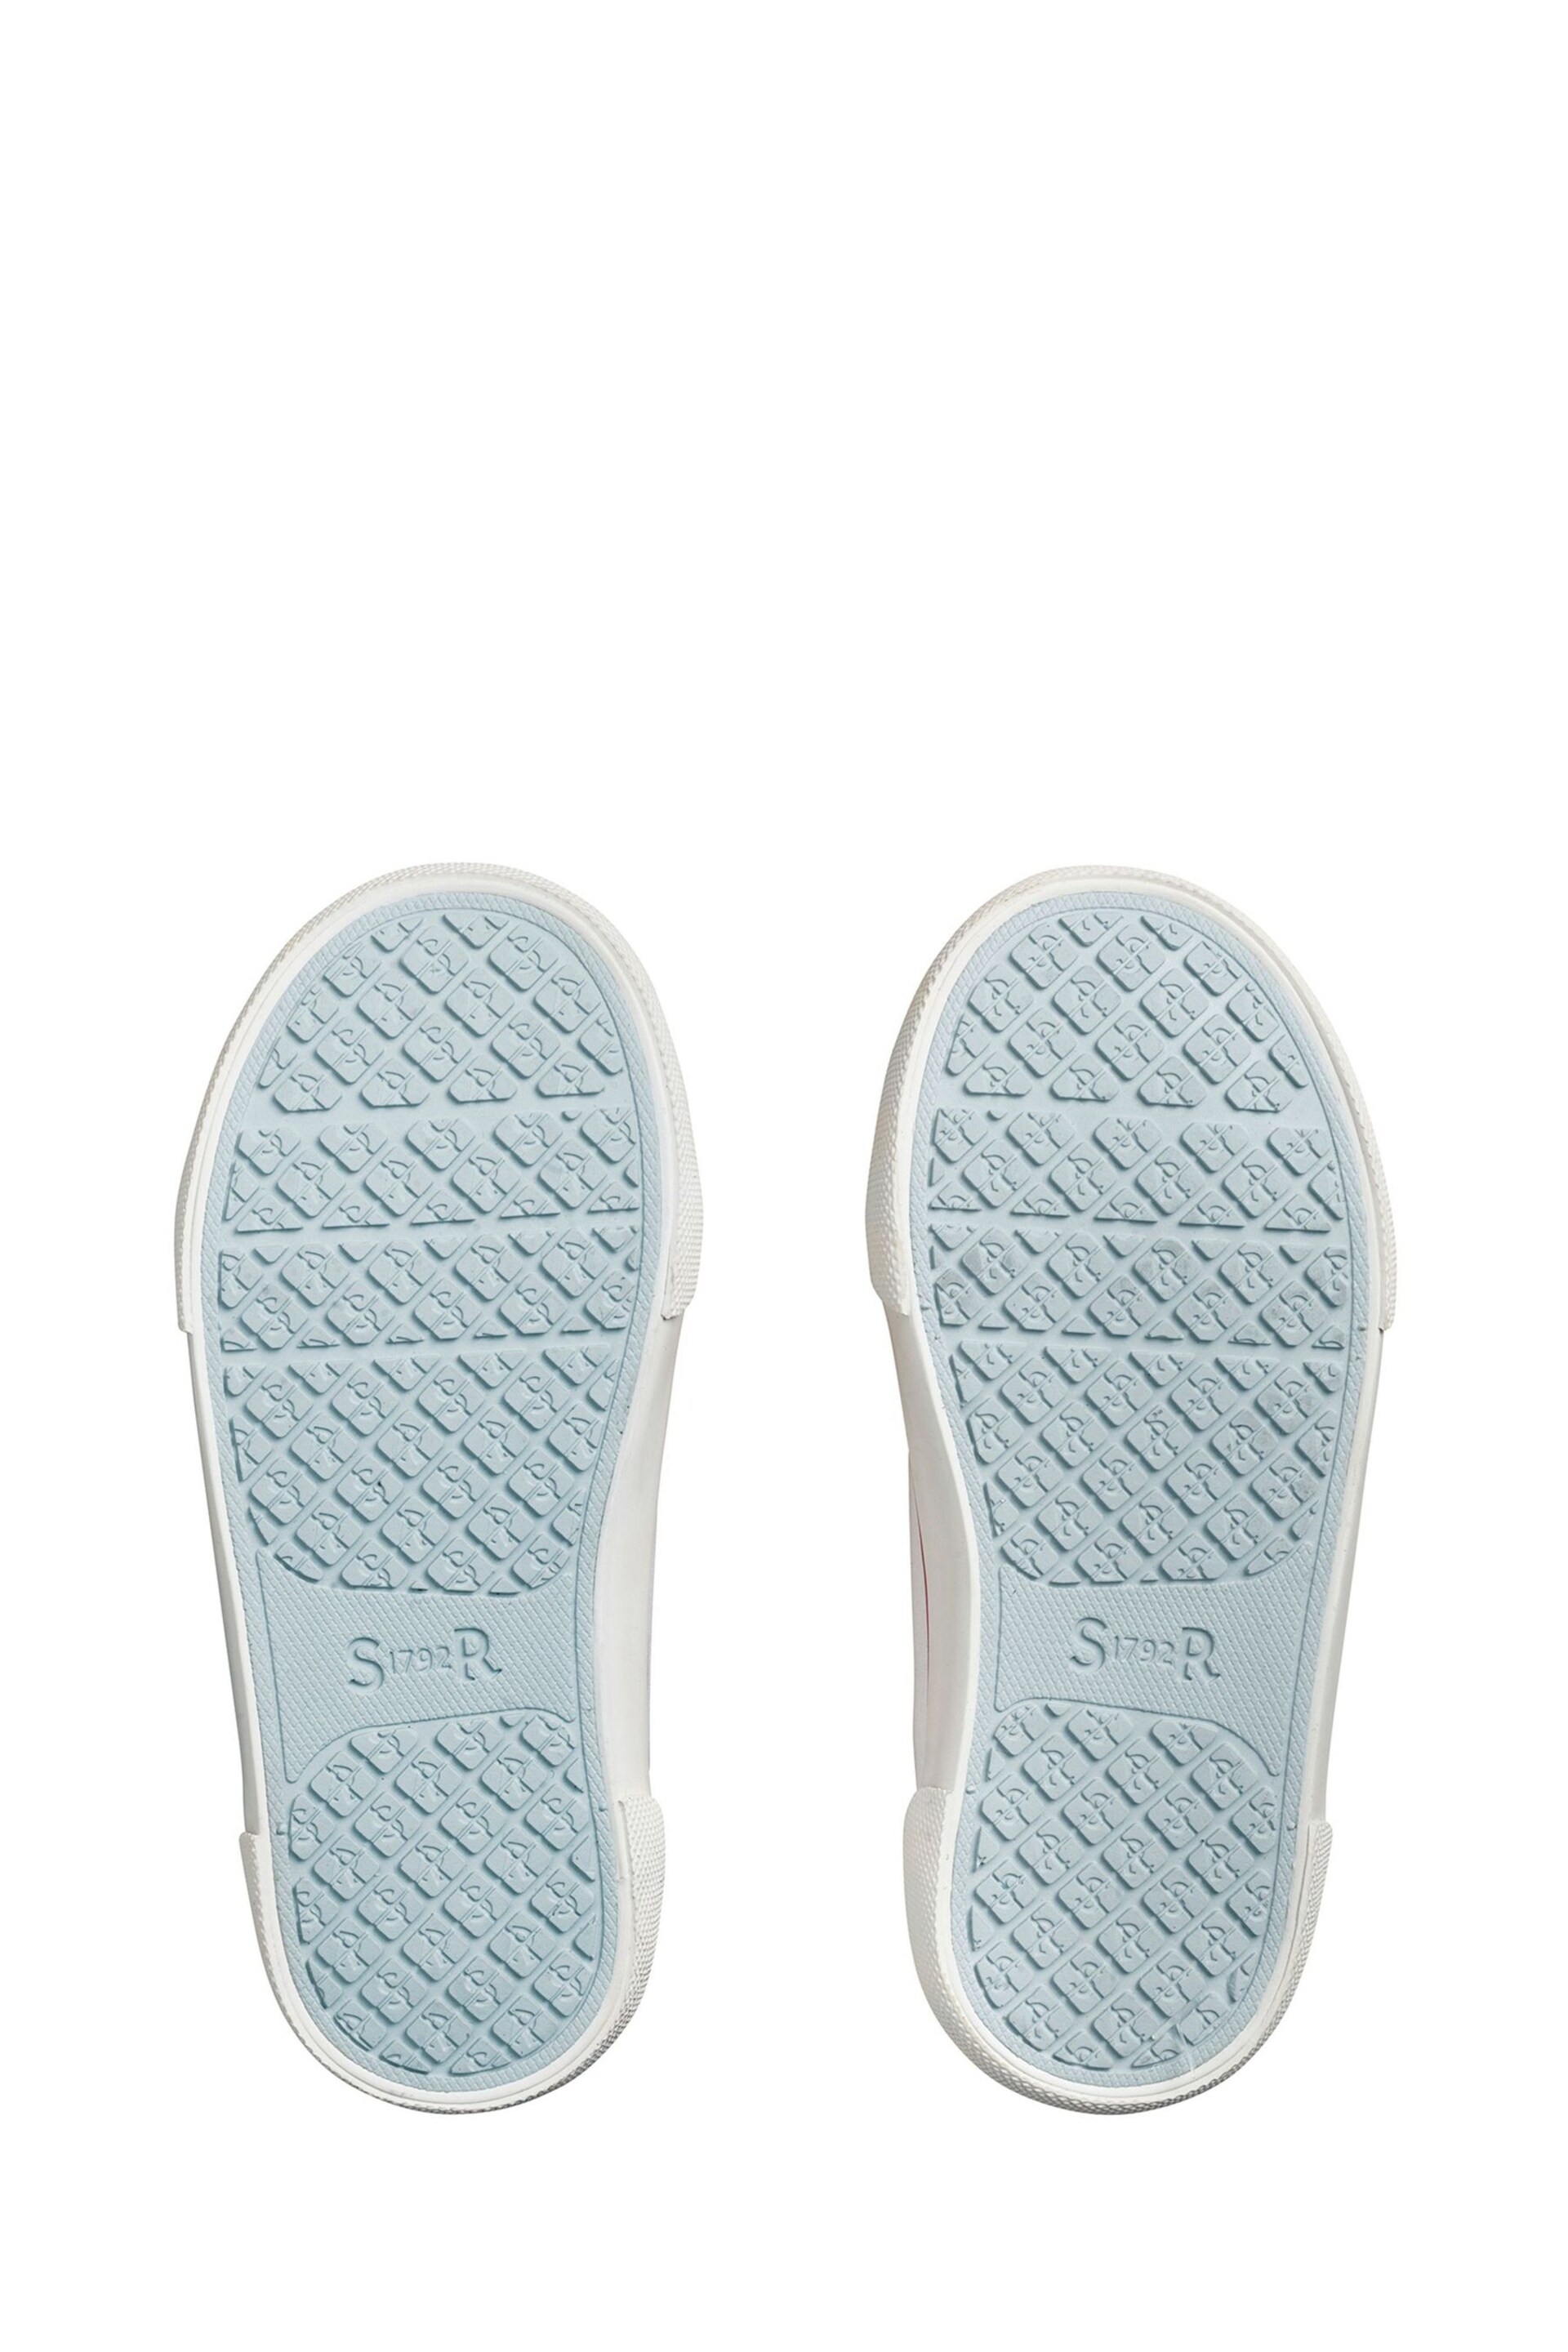 Start-Rite Sandcastle White Canvas Washable White Trainers - Image 6 of 6